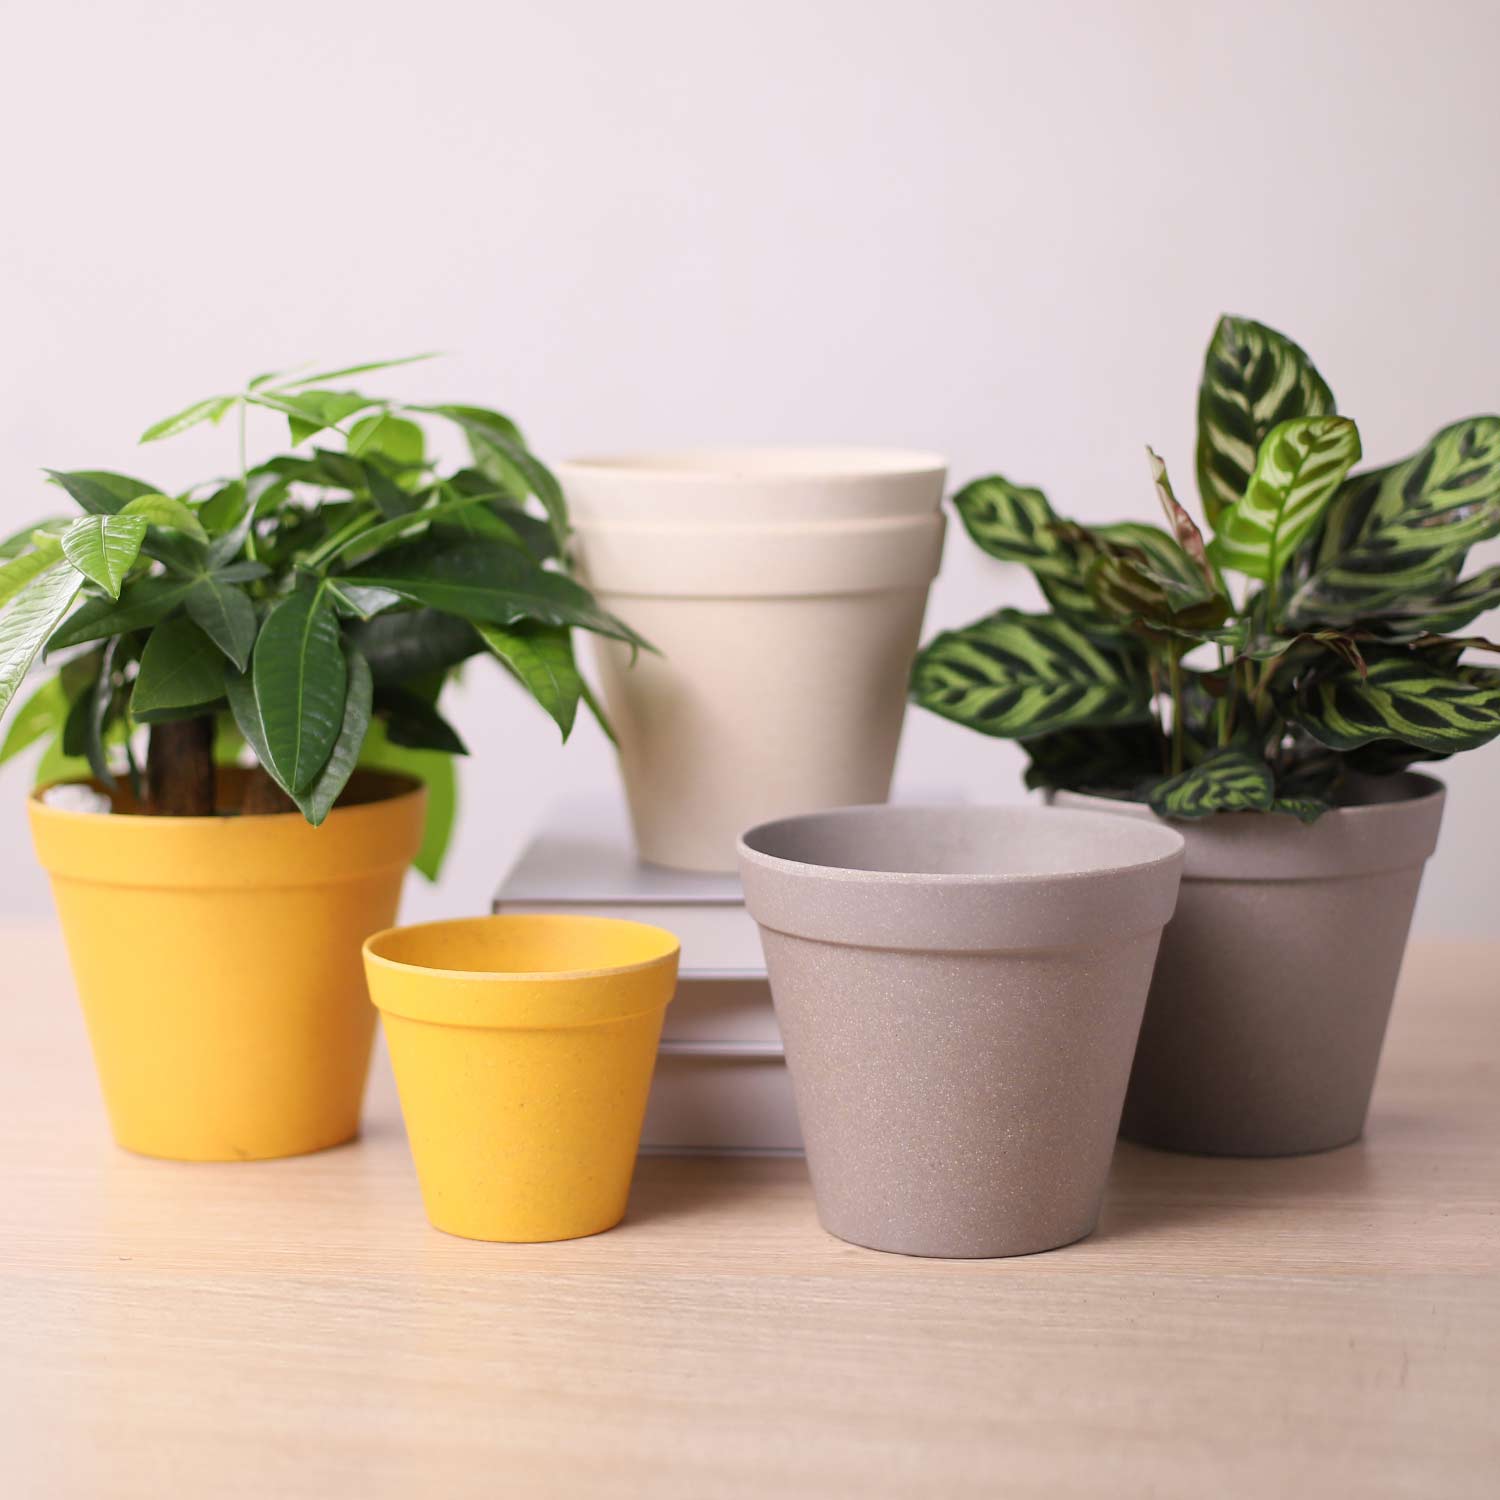 J&C Indoor plant pots planters for herbs flowers mini plants natural material durable